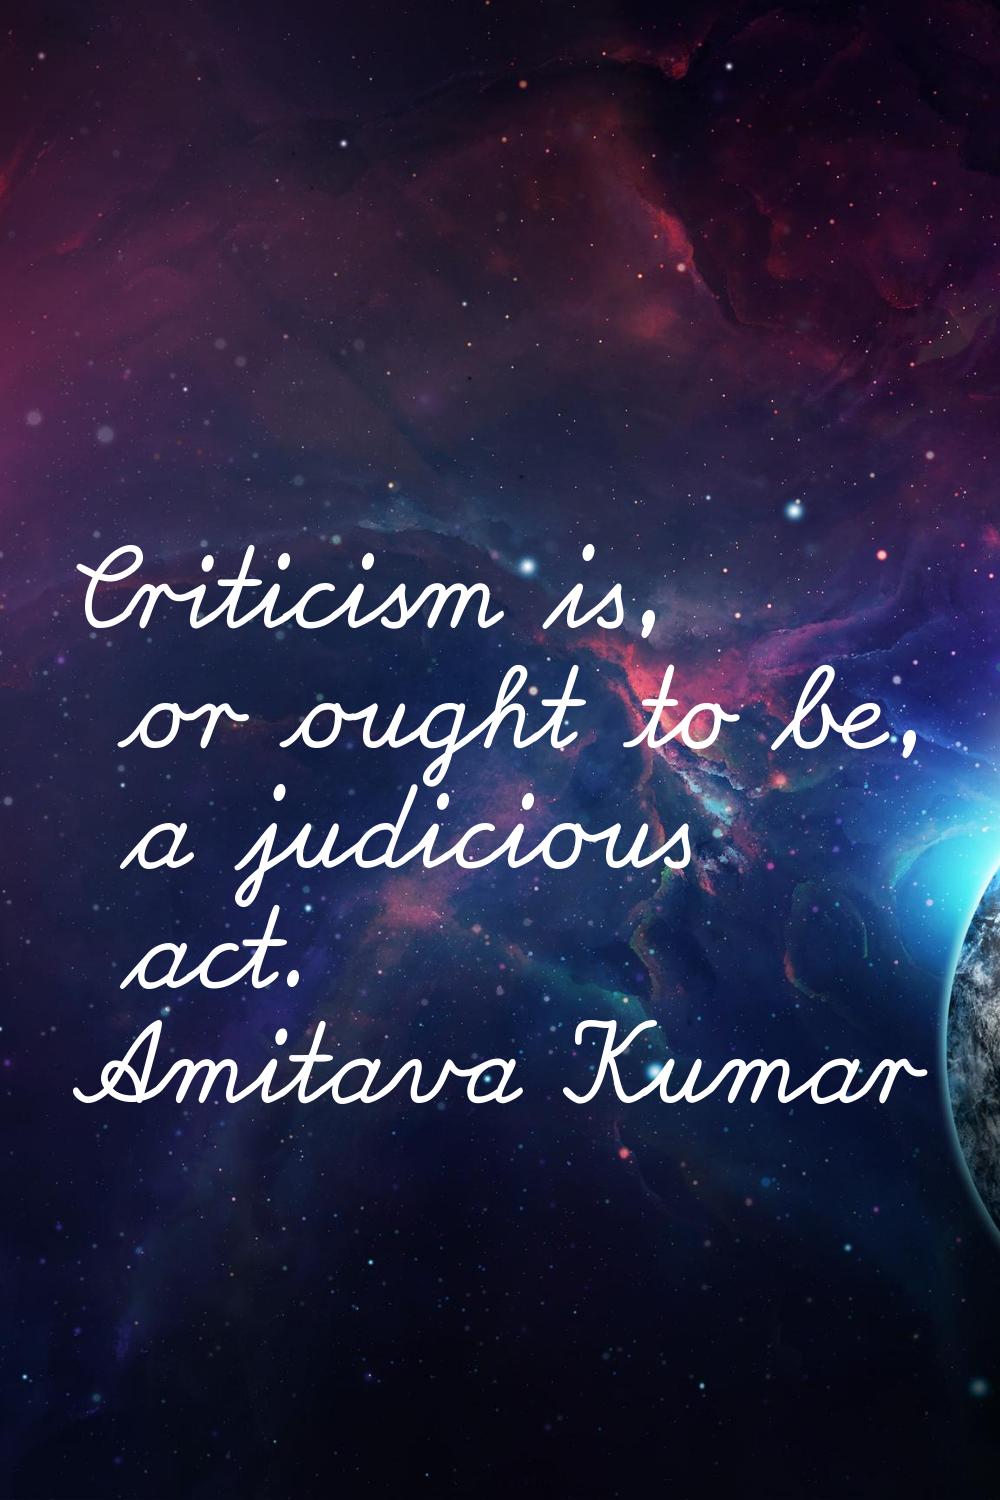 Criticism is, or ought to be, a judicious act.